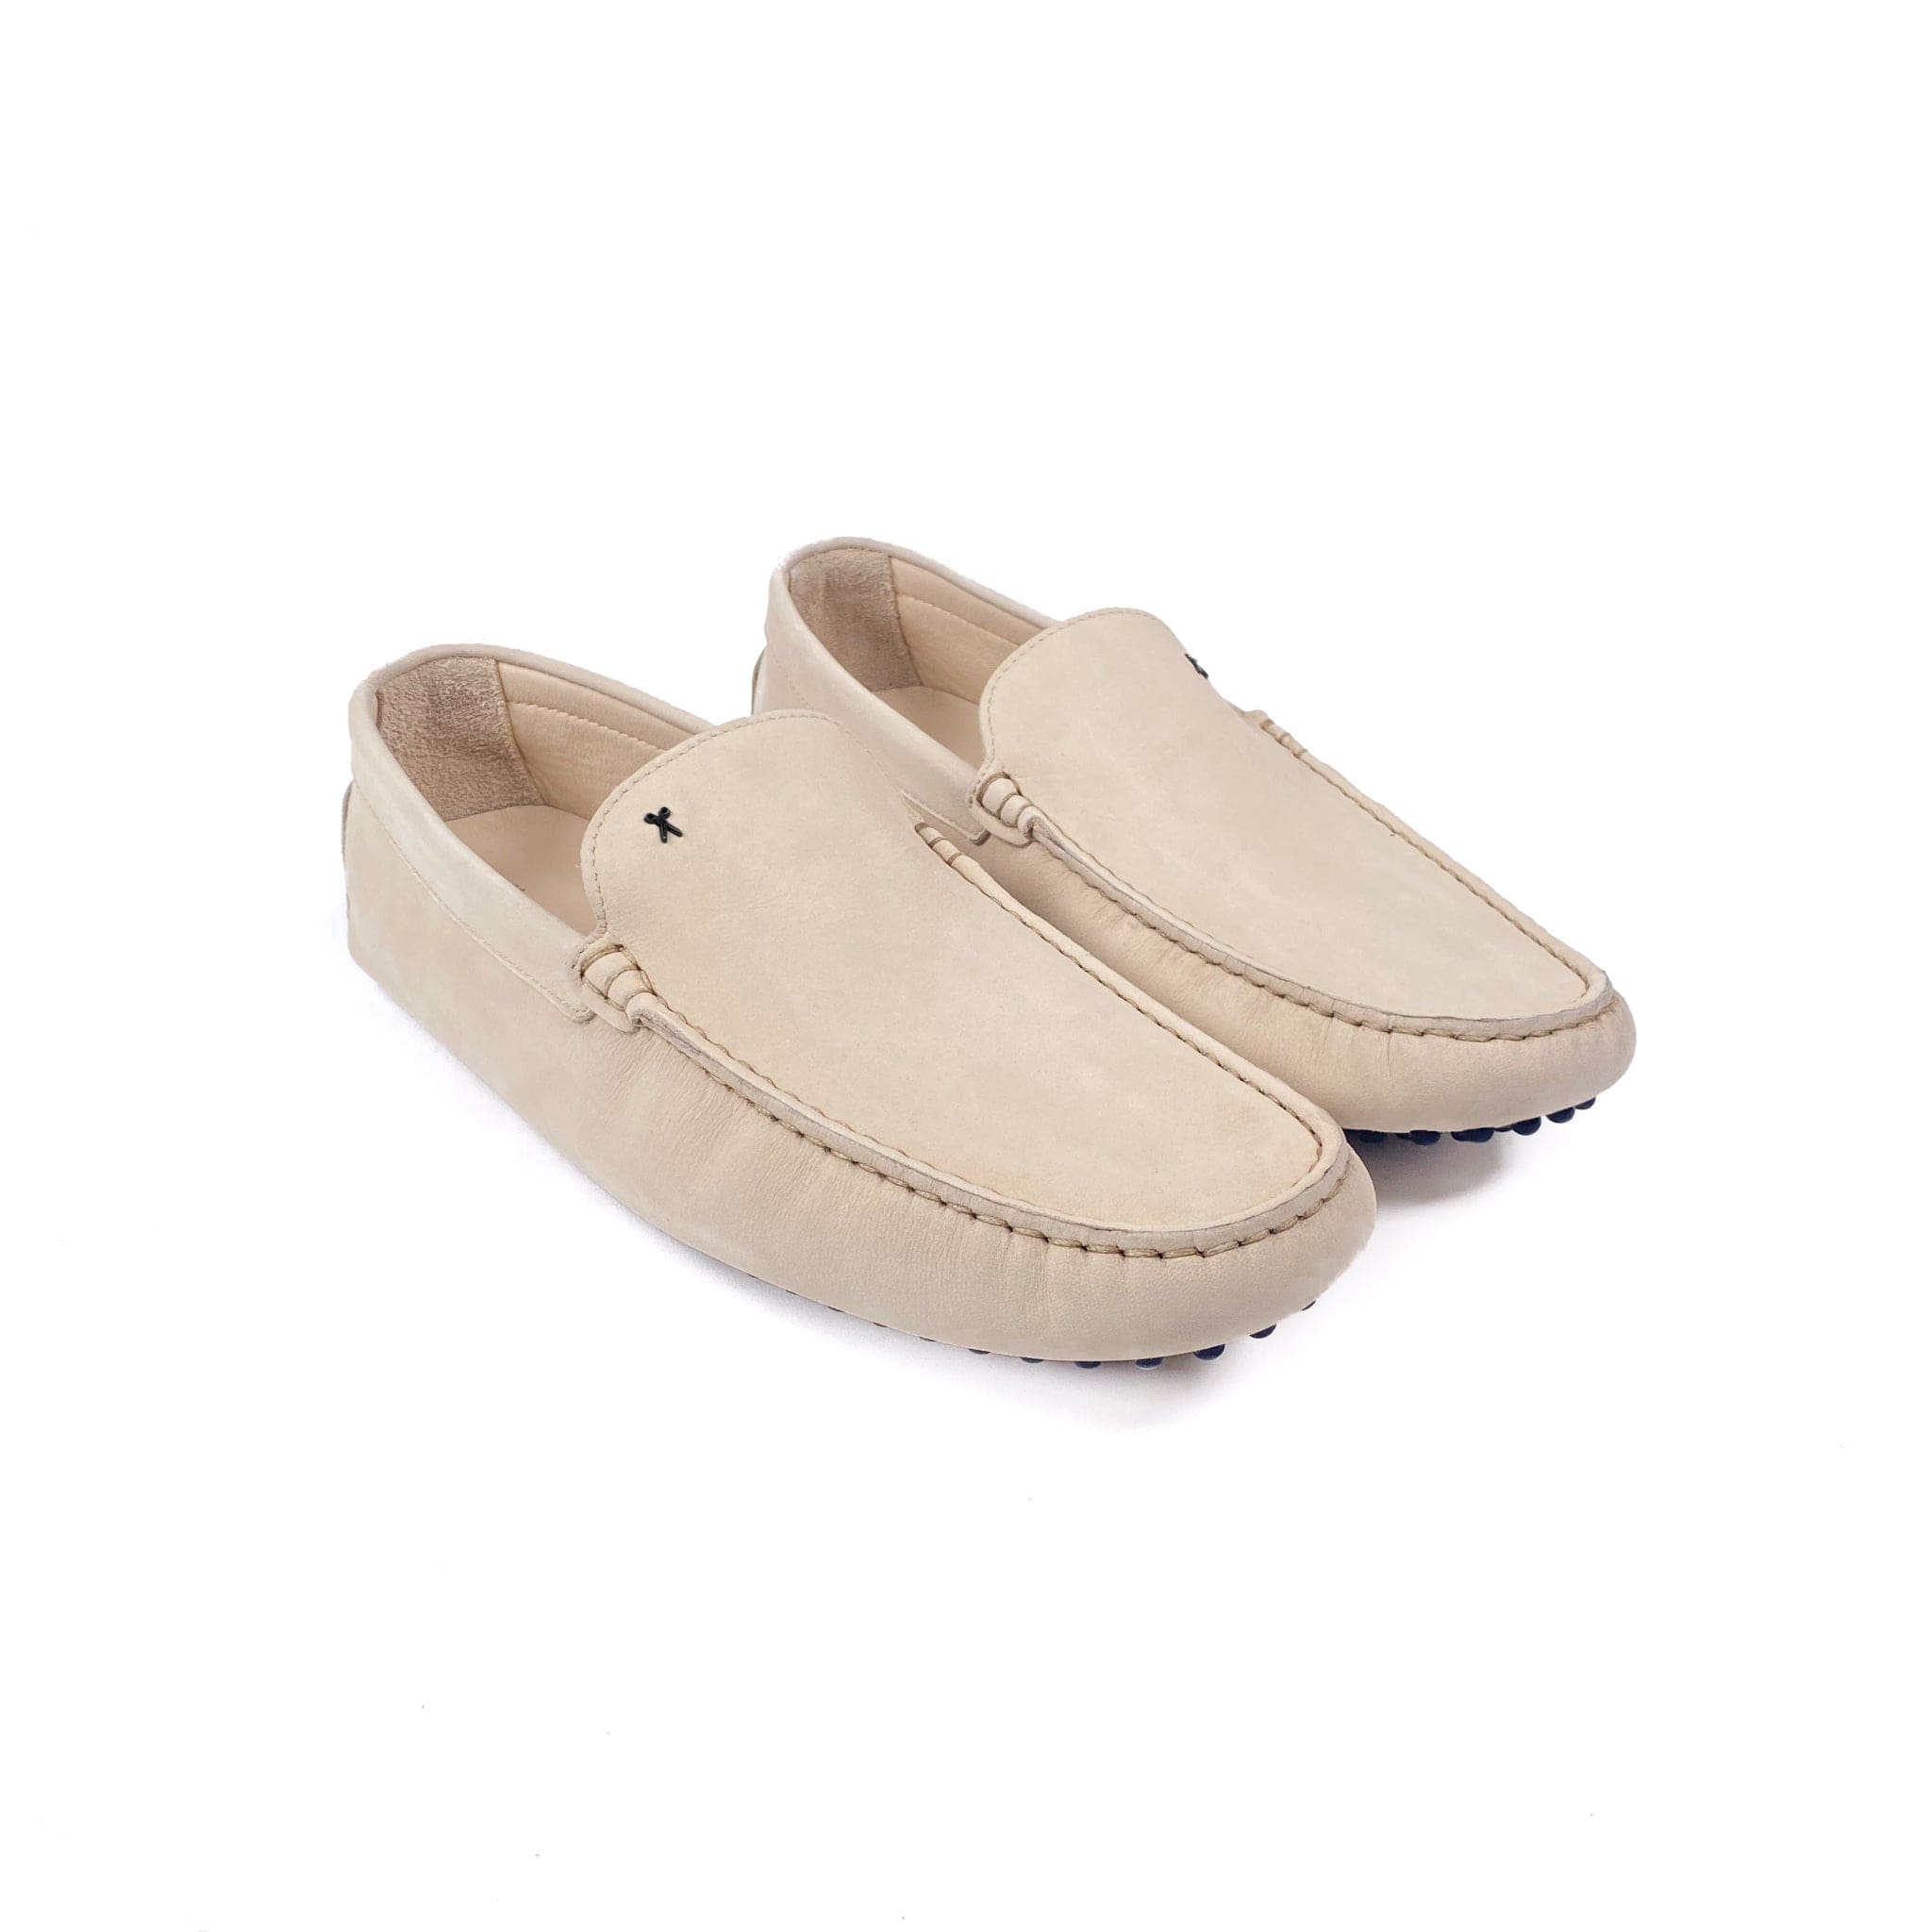 David Driving Shoe | Light Tan | Black Outsole | Made in Italy